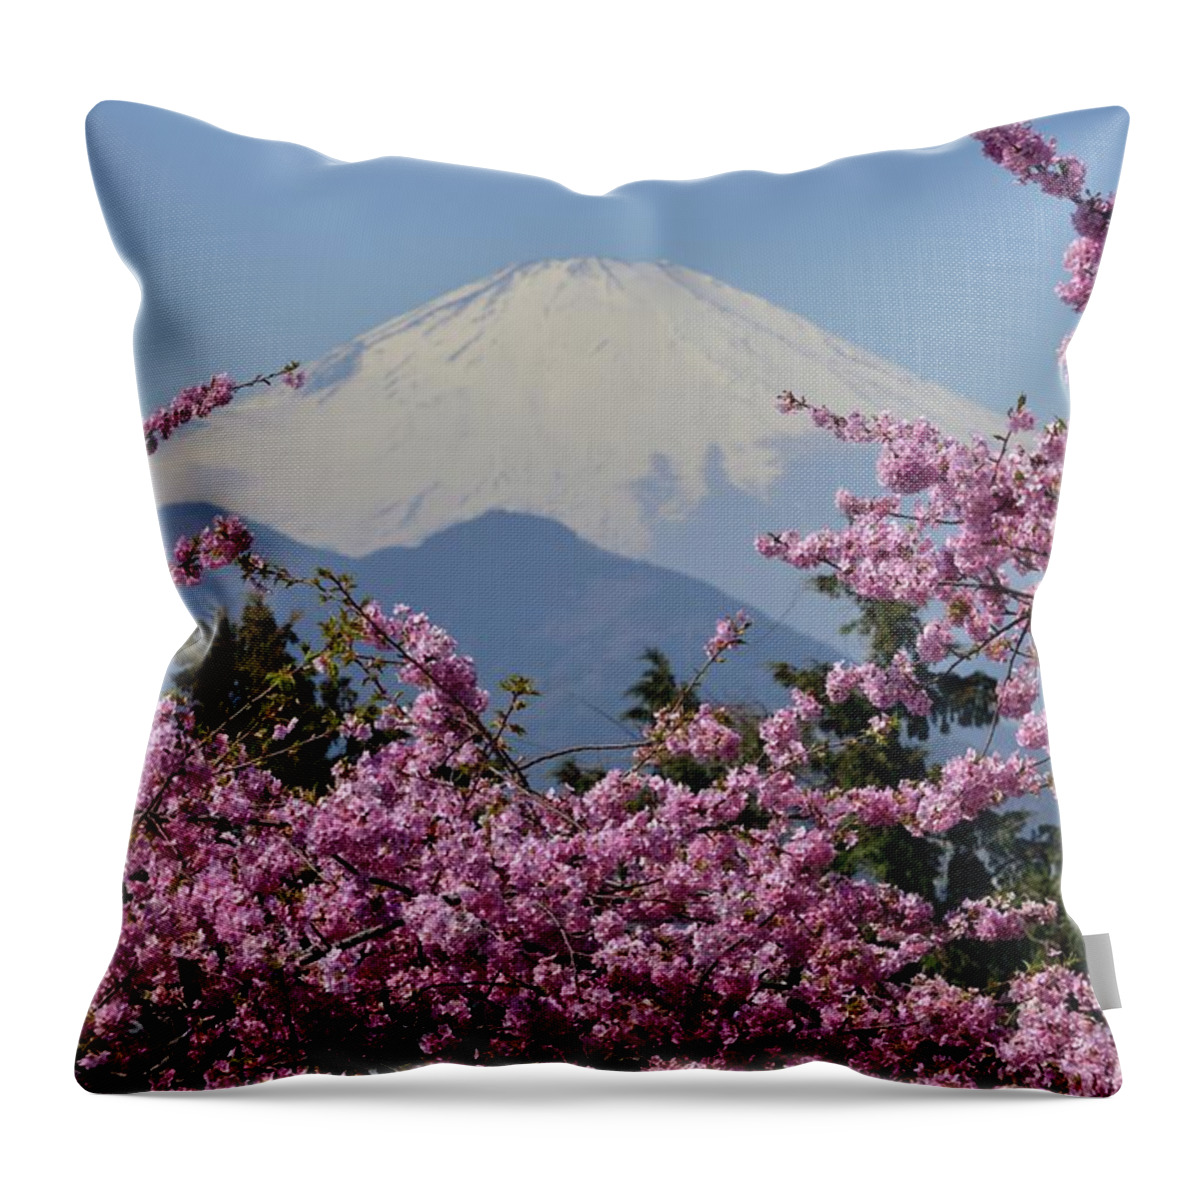 Tranquility Throw Pillow featuring the photograph Mt Fuji And Cherry Blossoms by Photos From Japan, Asia And Othe Of The World